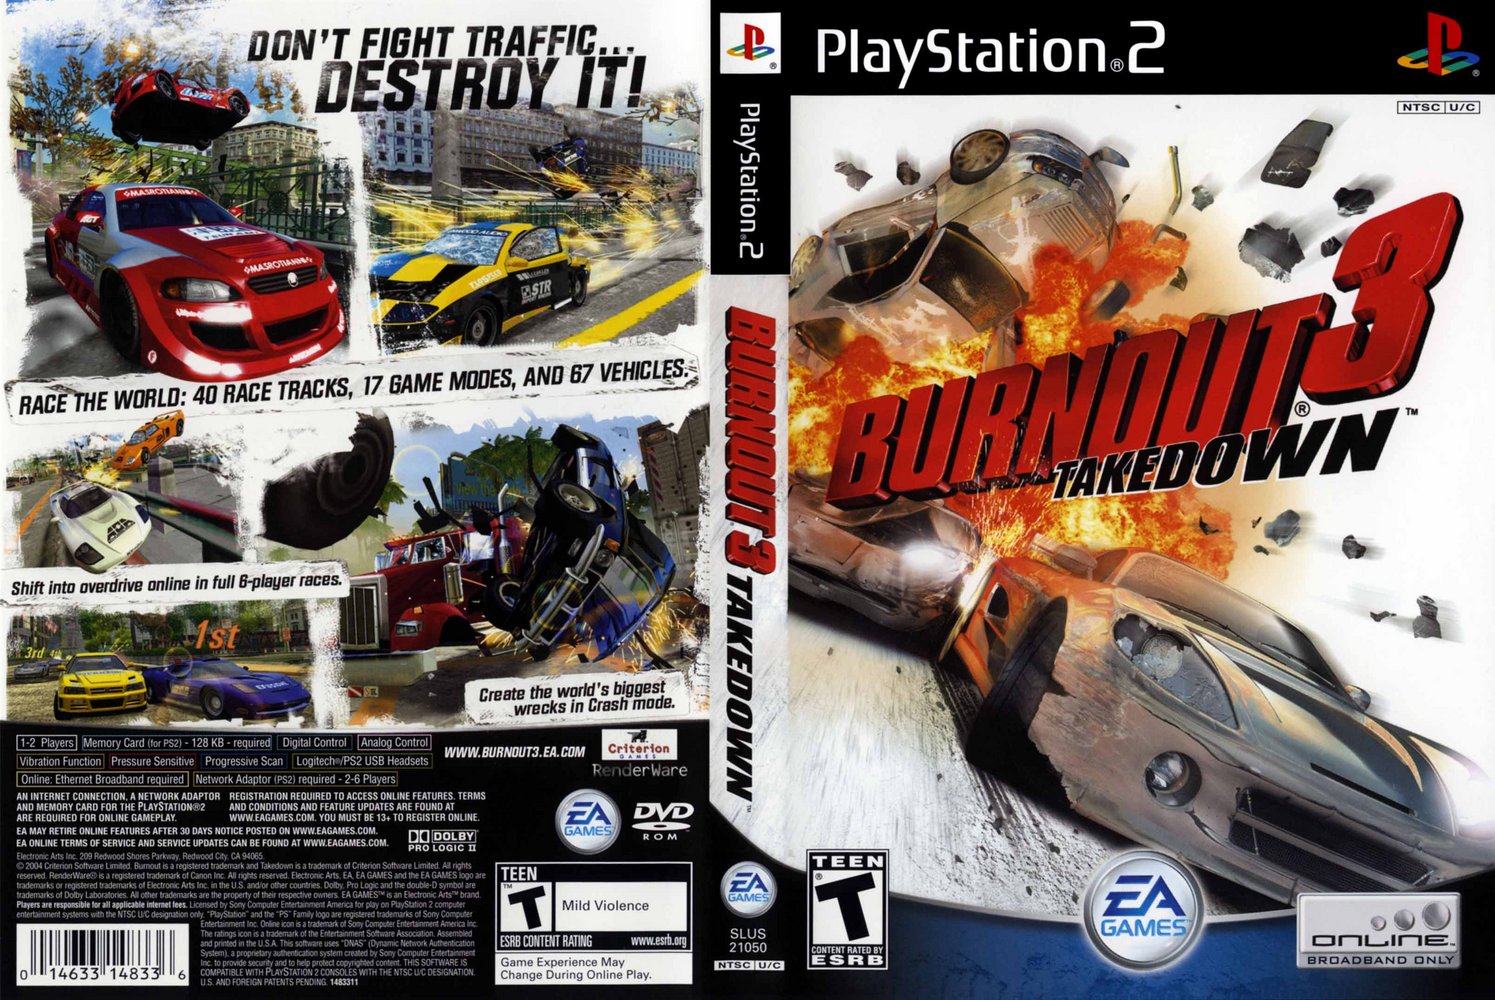 ps2 iso games pcsx2 torrent